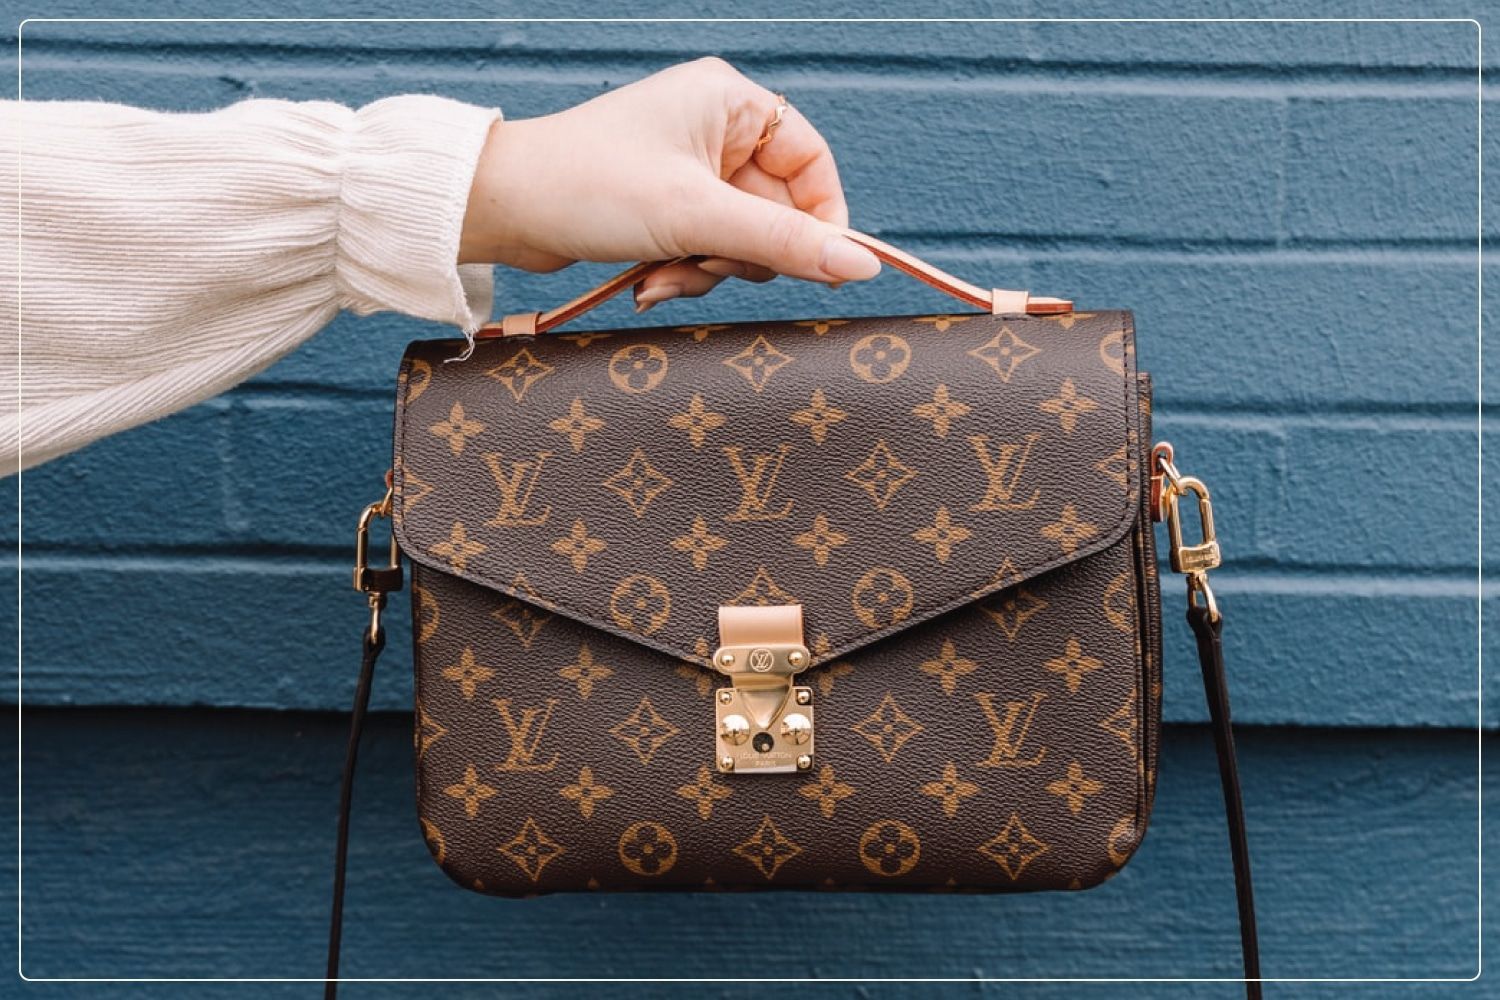 woman's hand holding out louis vuitton purse